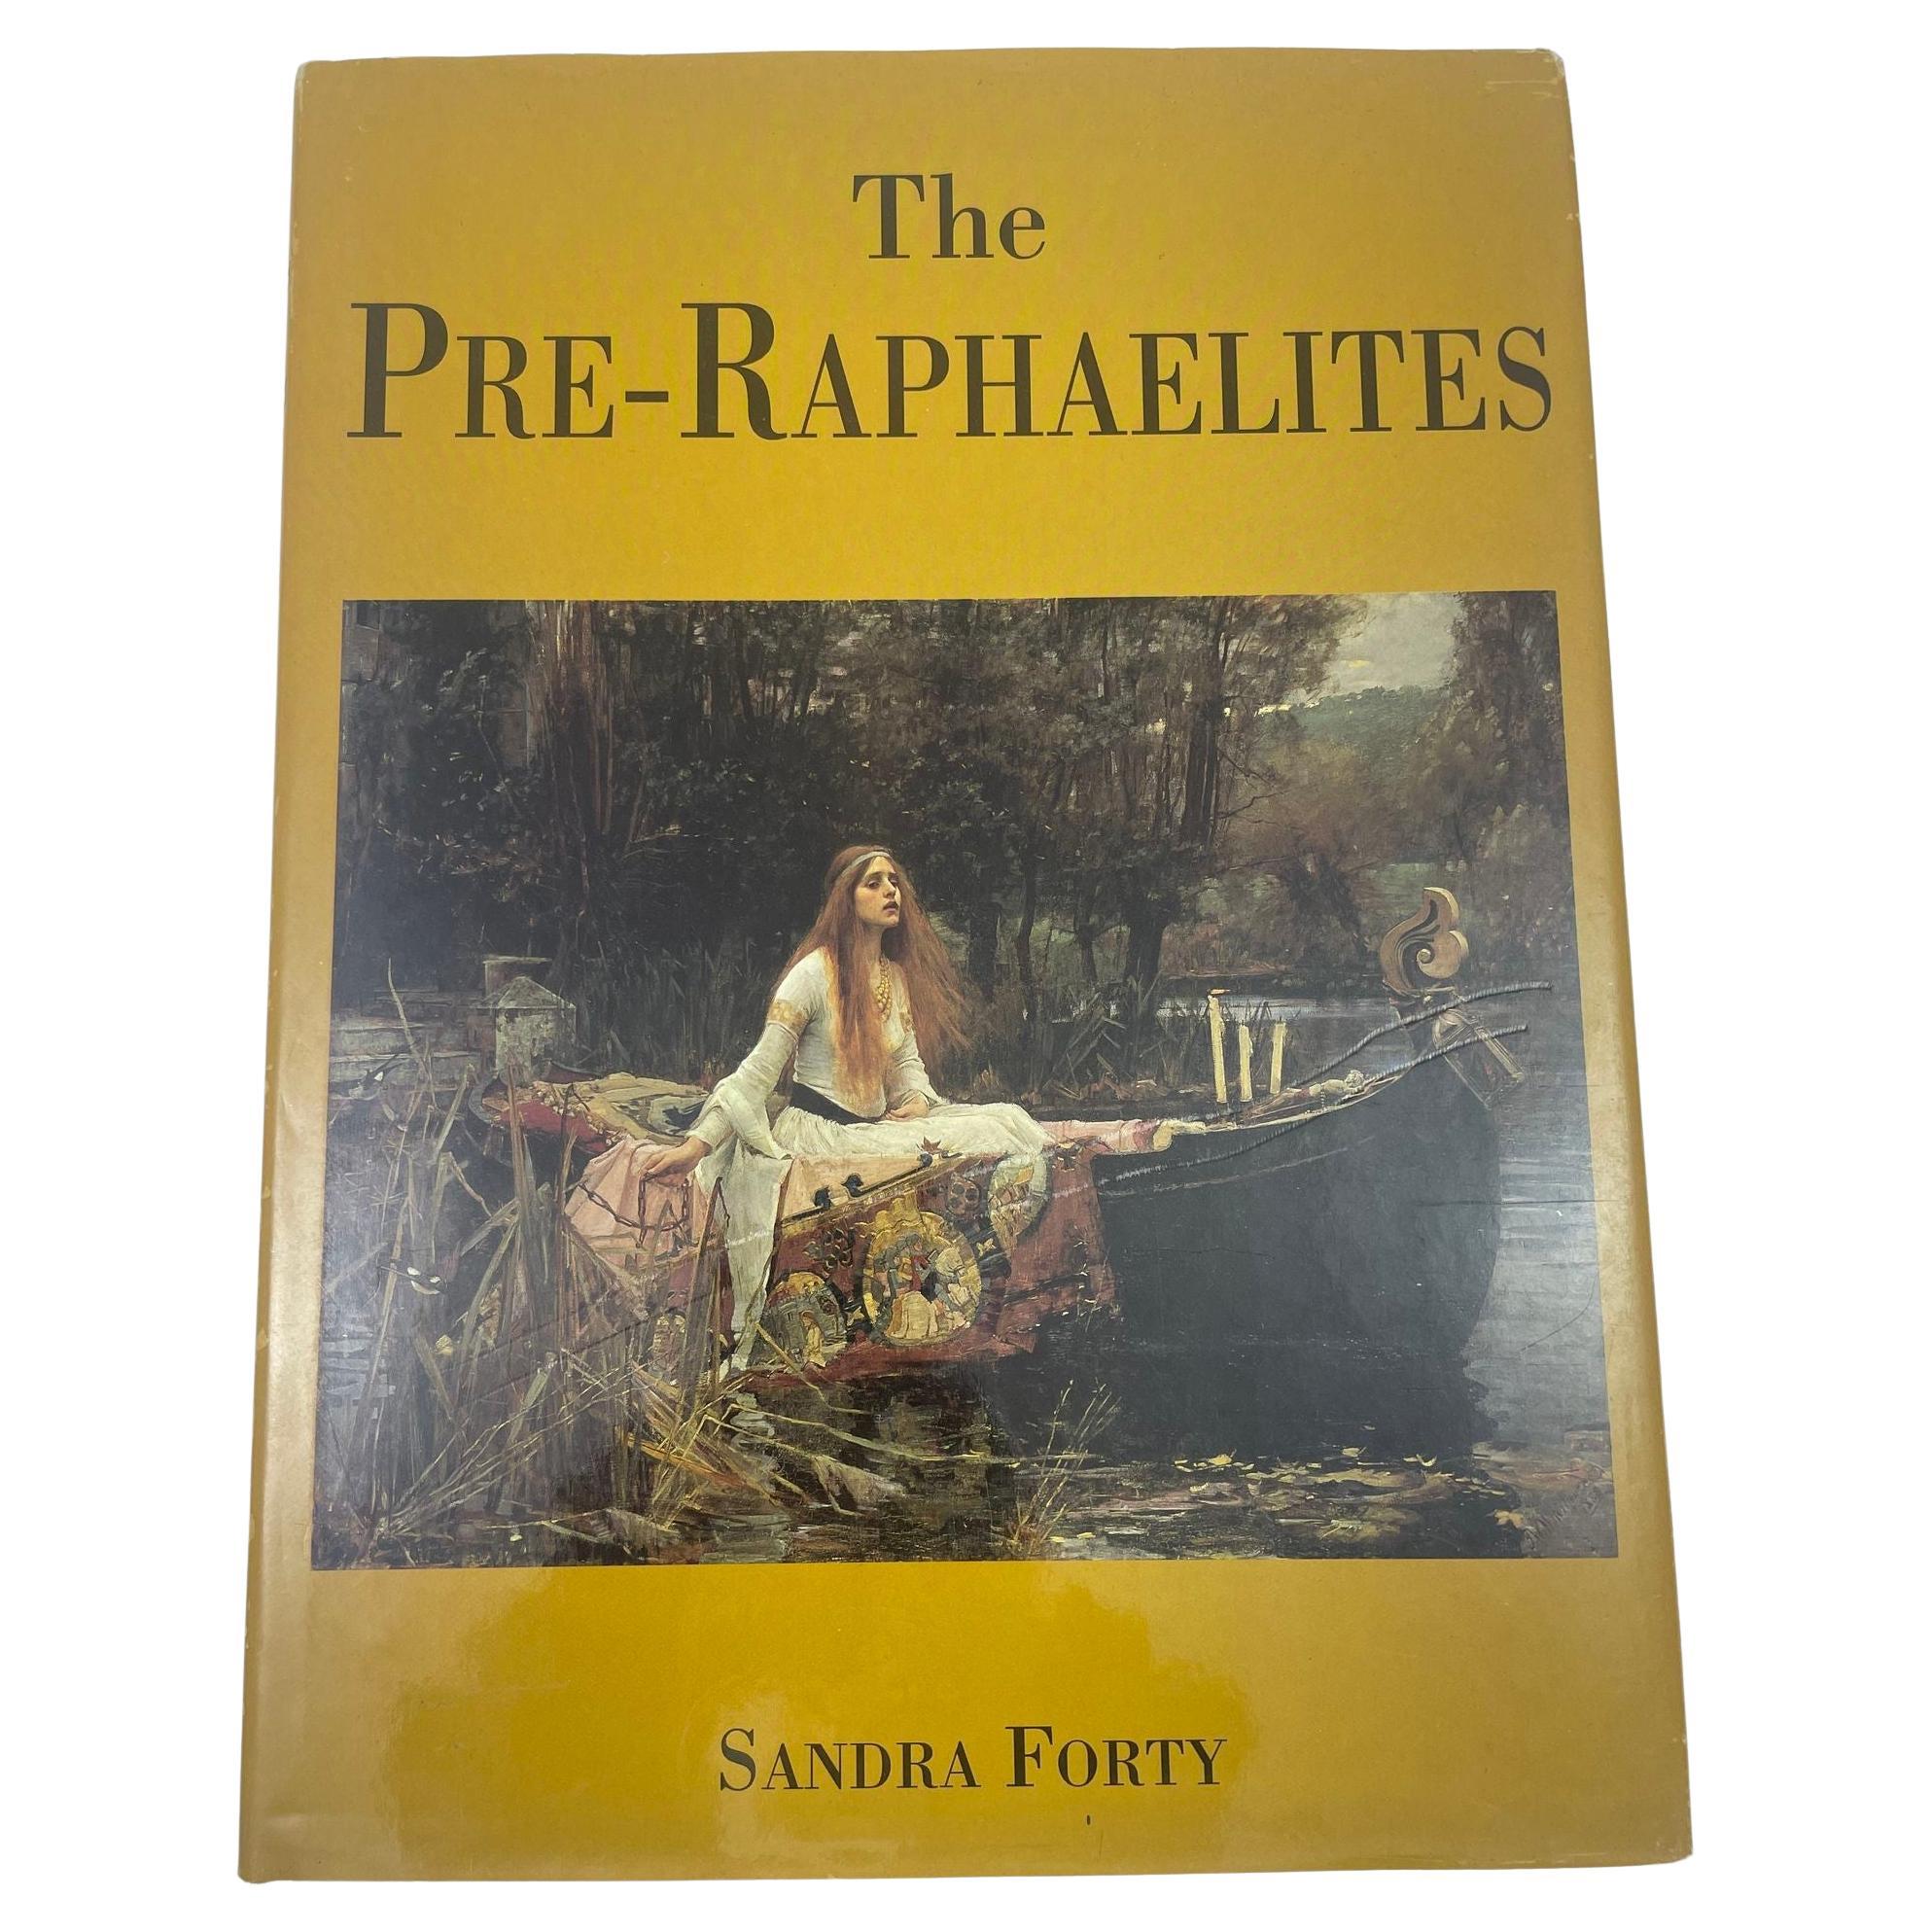 The Pre-Raphaelites by Sandra Forty Hardcover Book 1st Ed. 1997